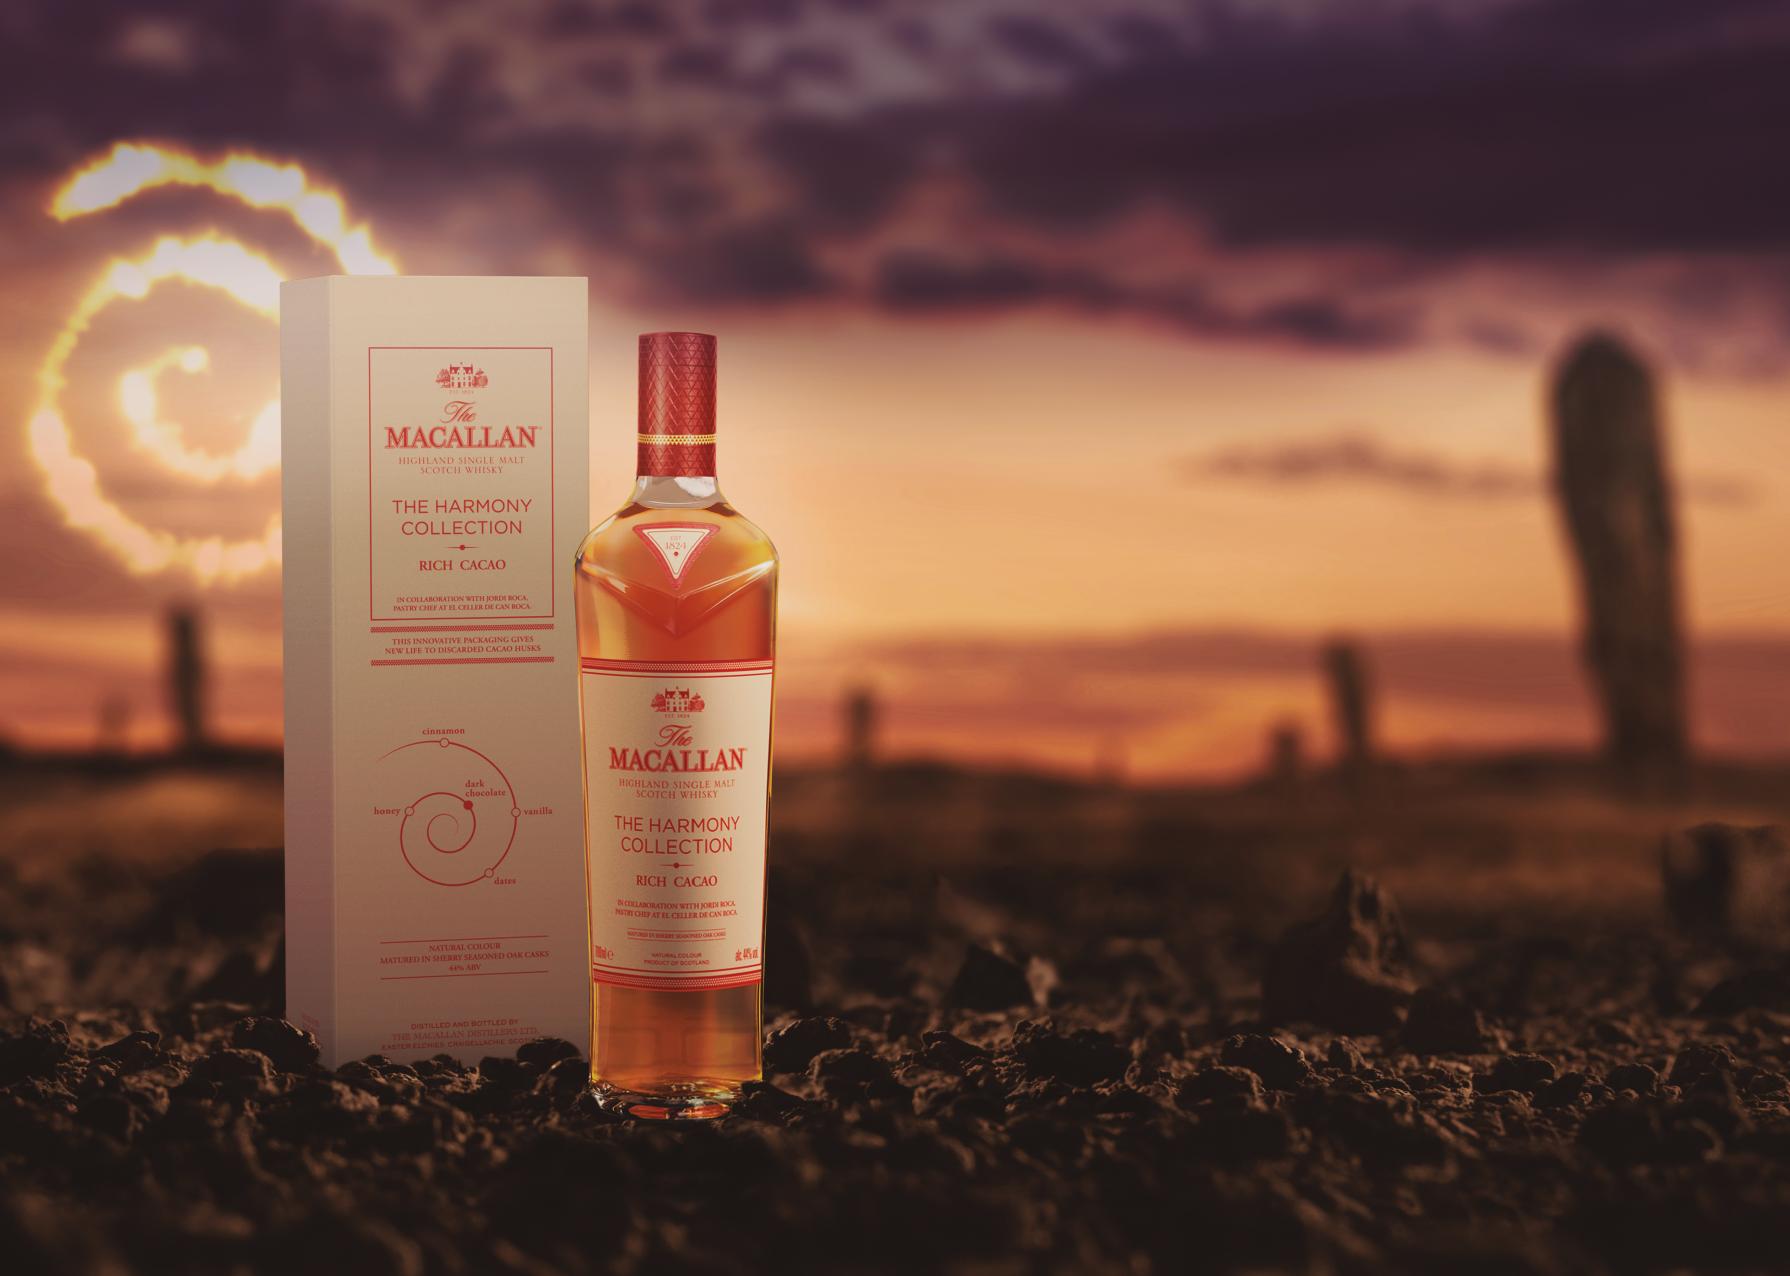 The Macallan Harmony Collection Rich Cacao To Singapore: 4 – 5 December 2021